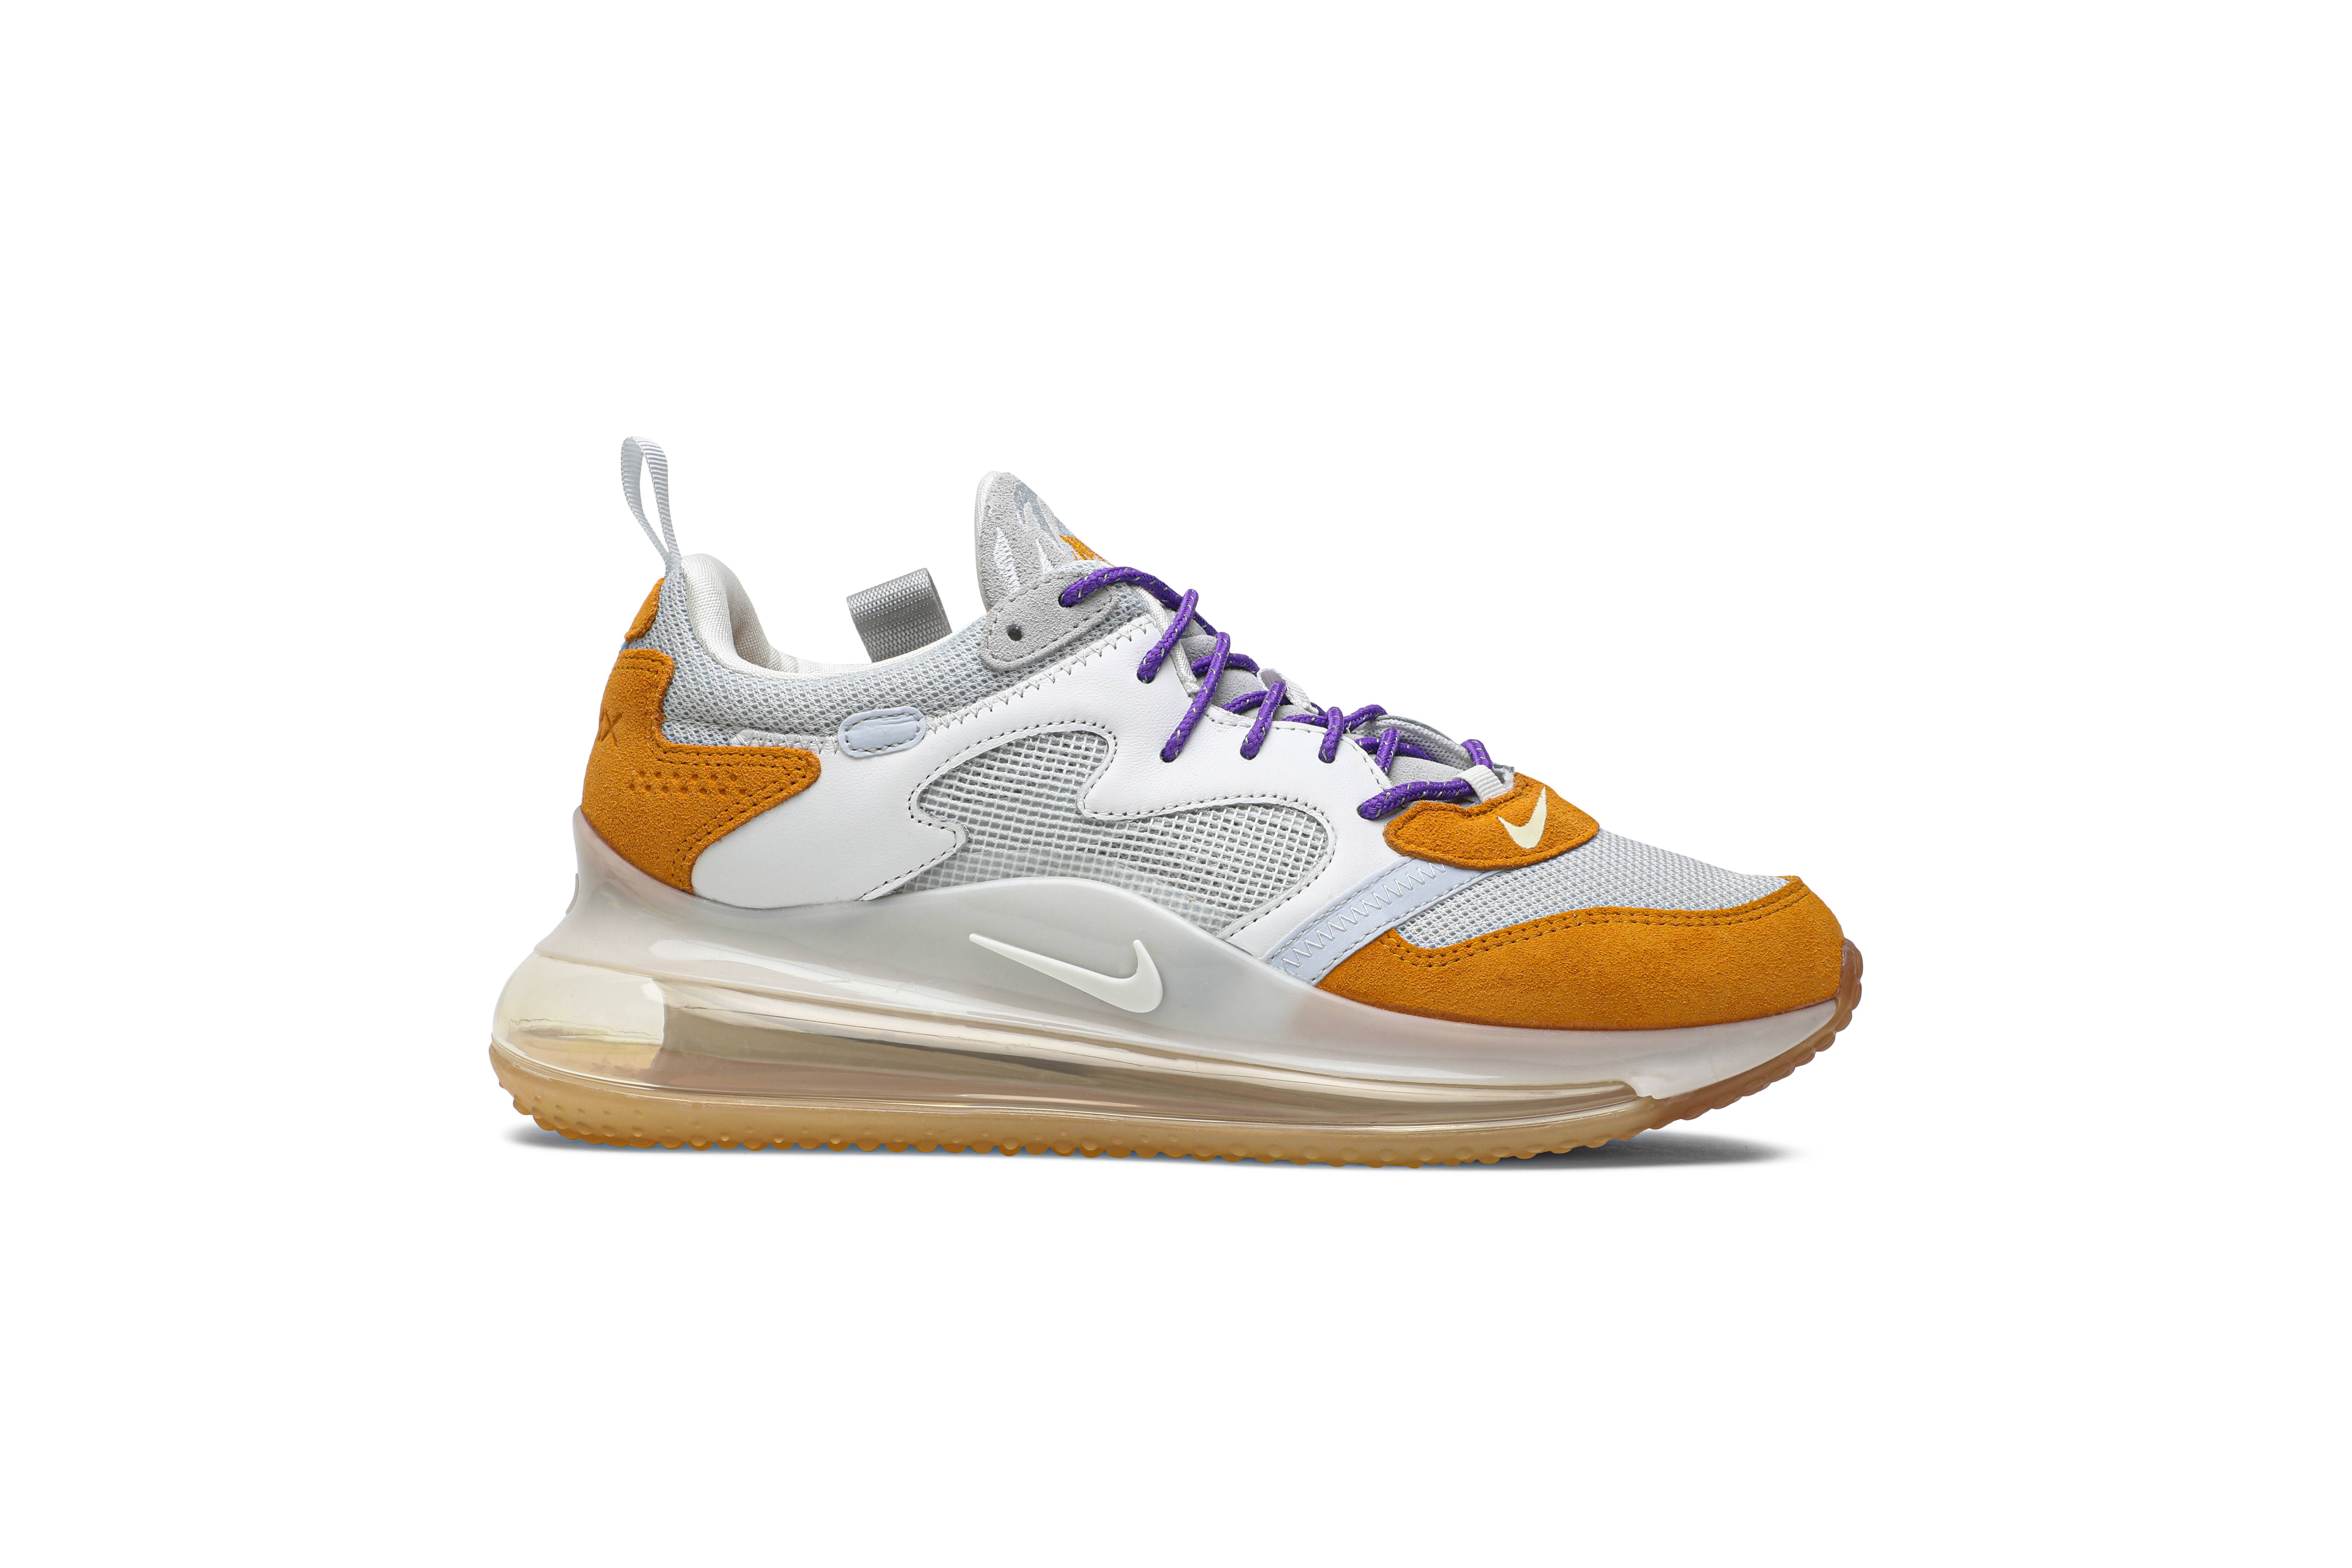 odell air max 720